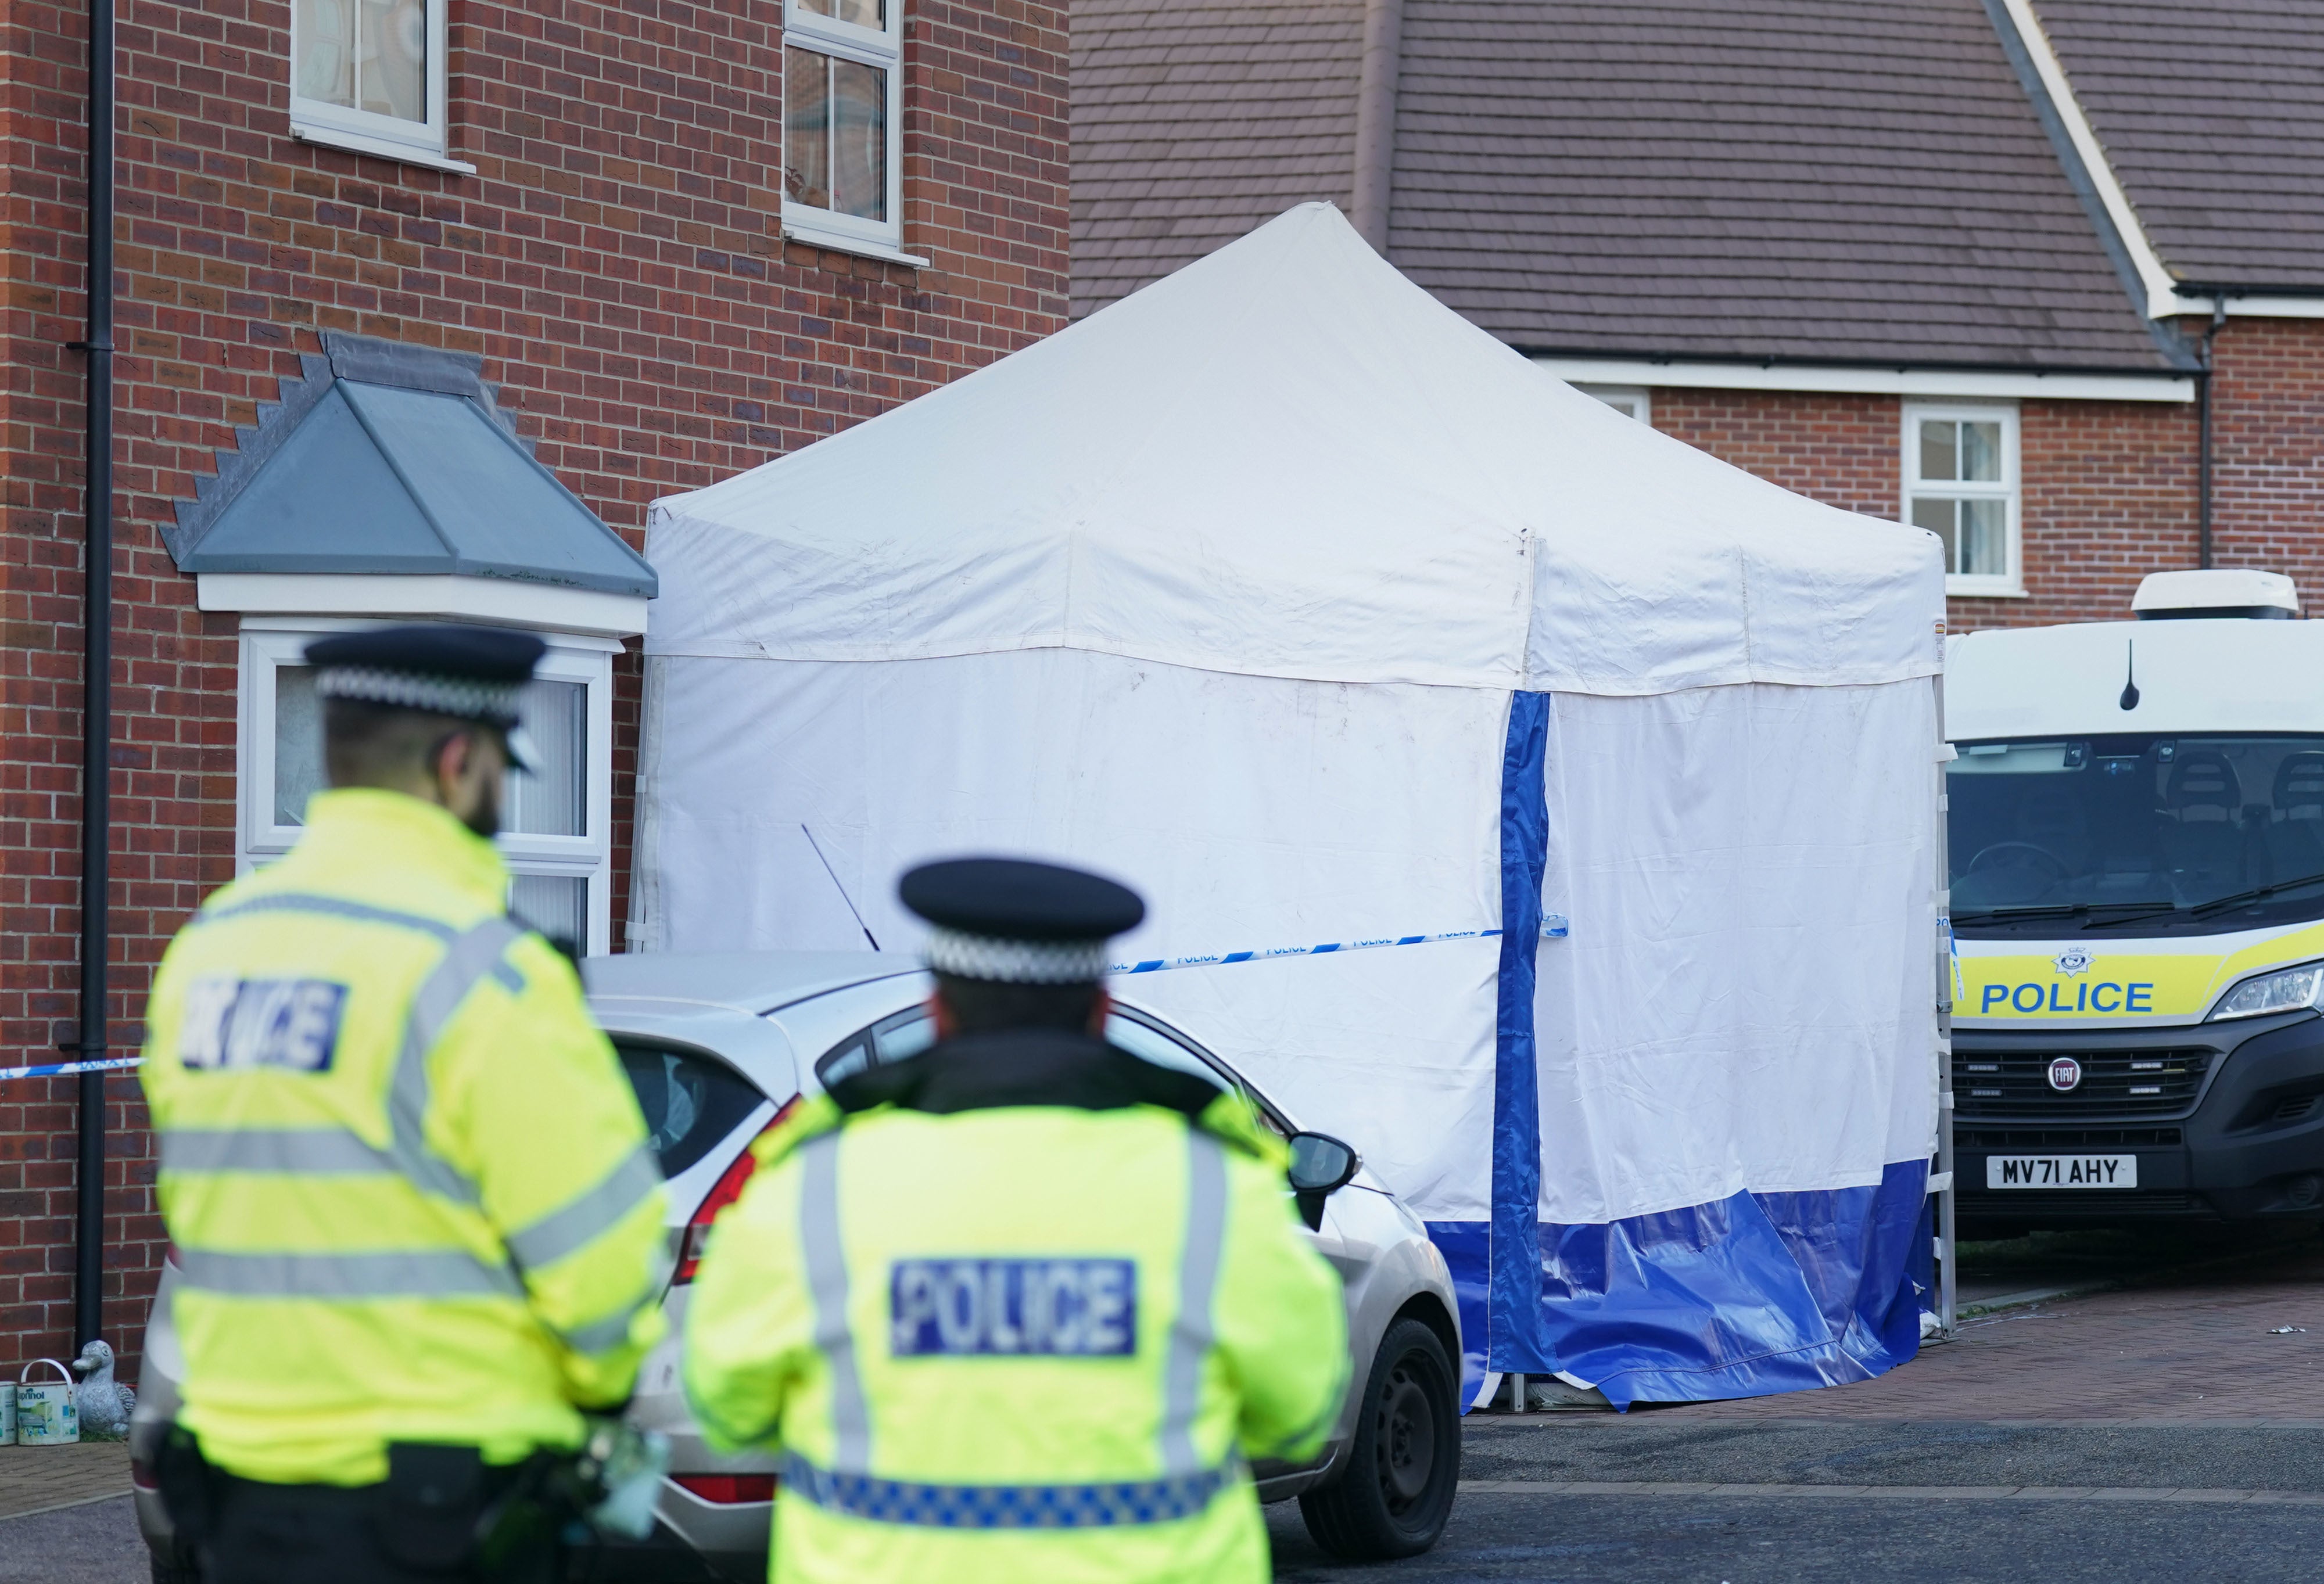 Norfolk Police have referred themselves to the IOPC after receiving a 999 call an hour before the bodies were discovered